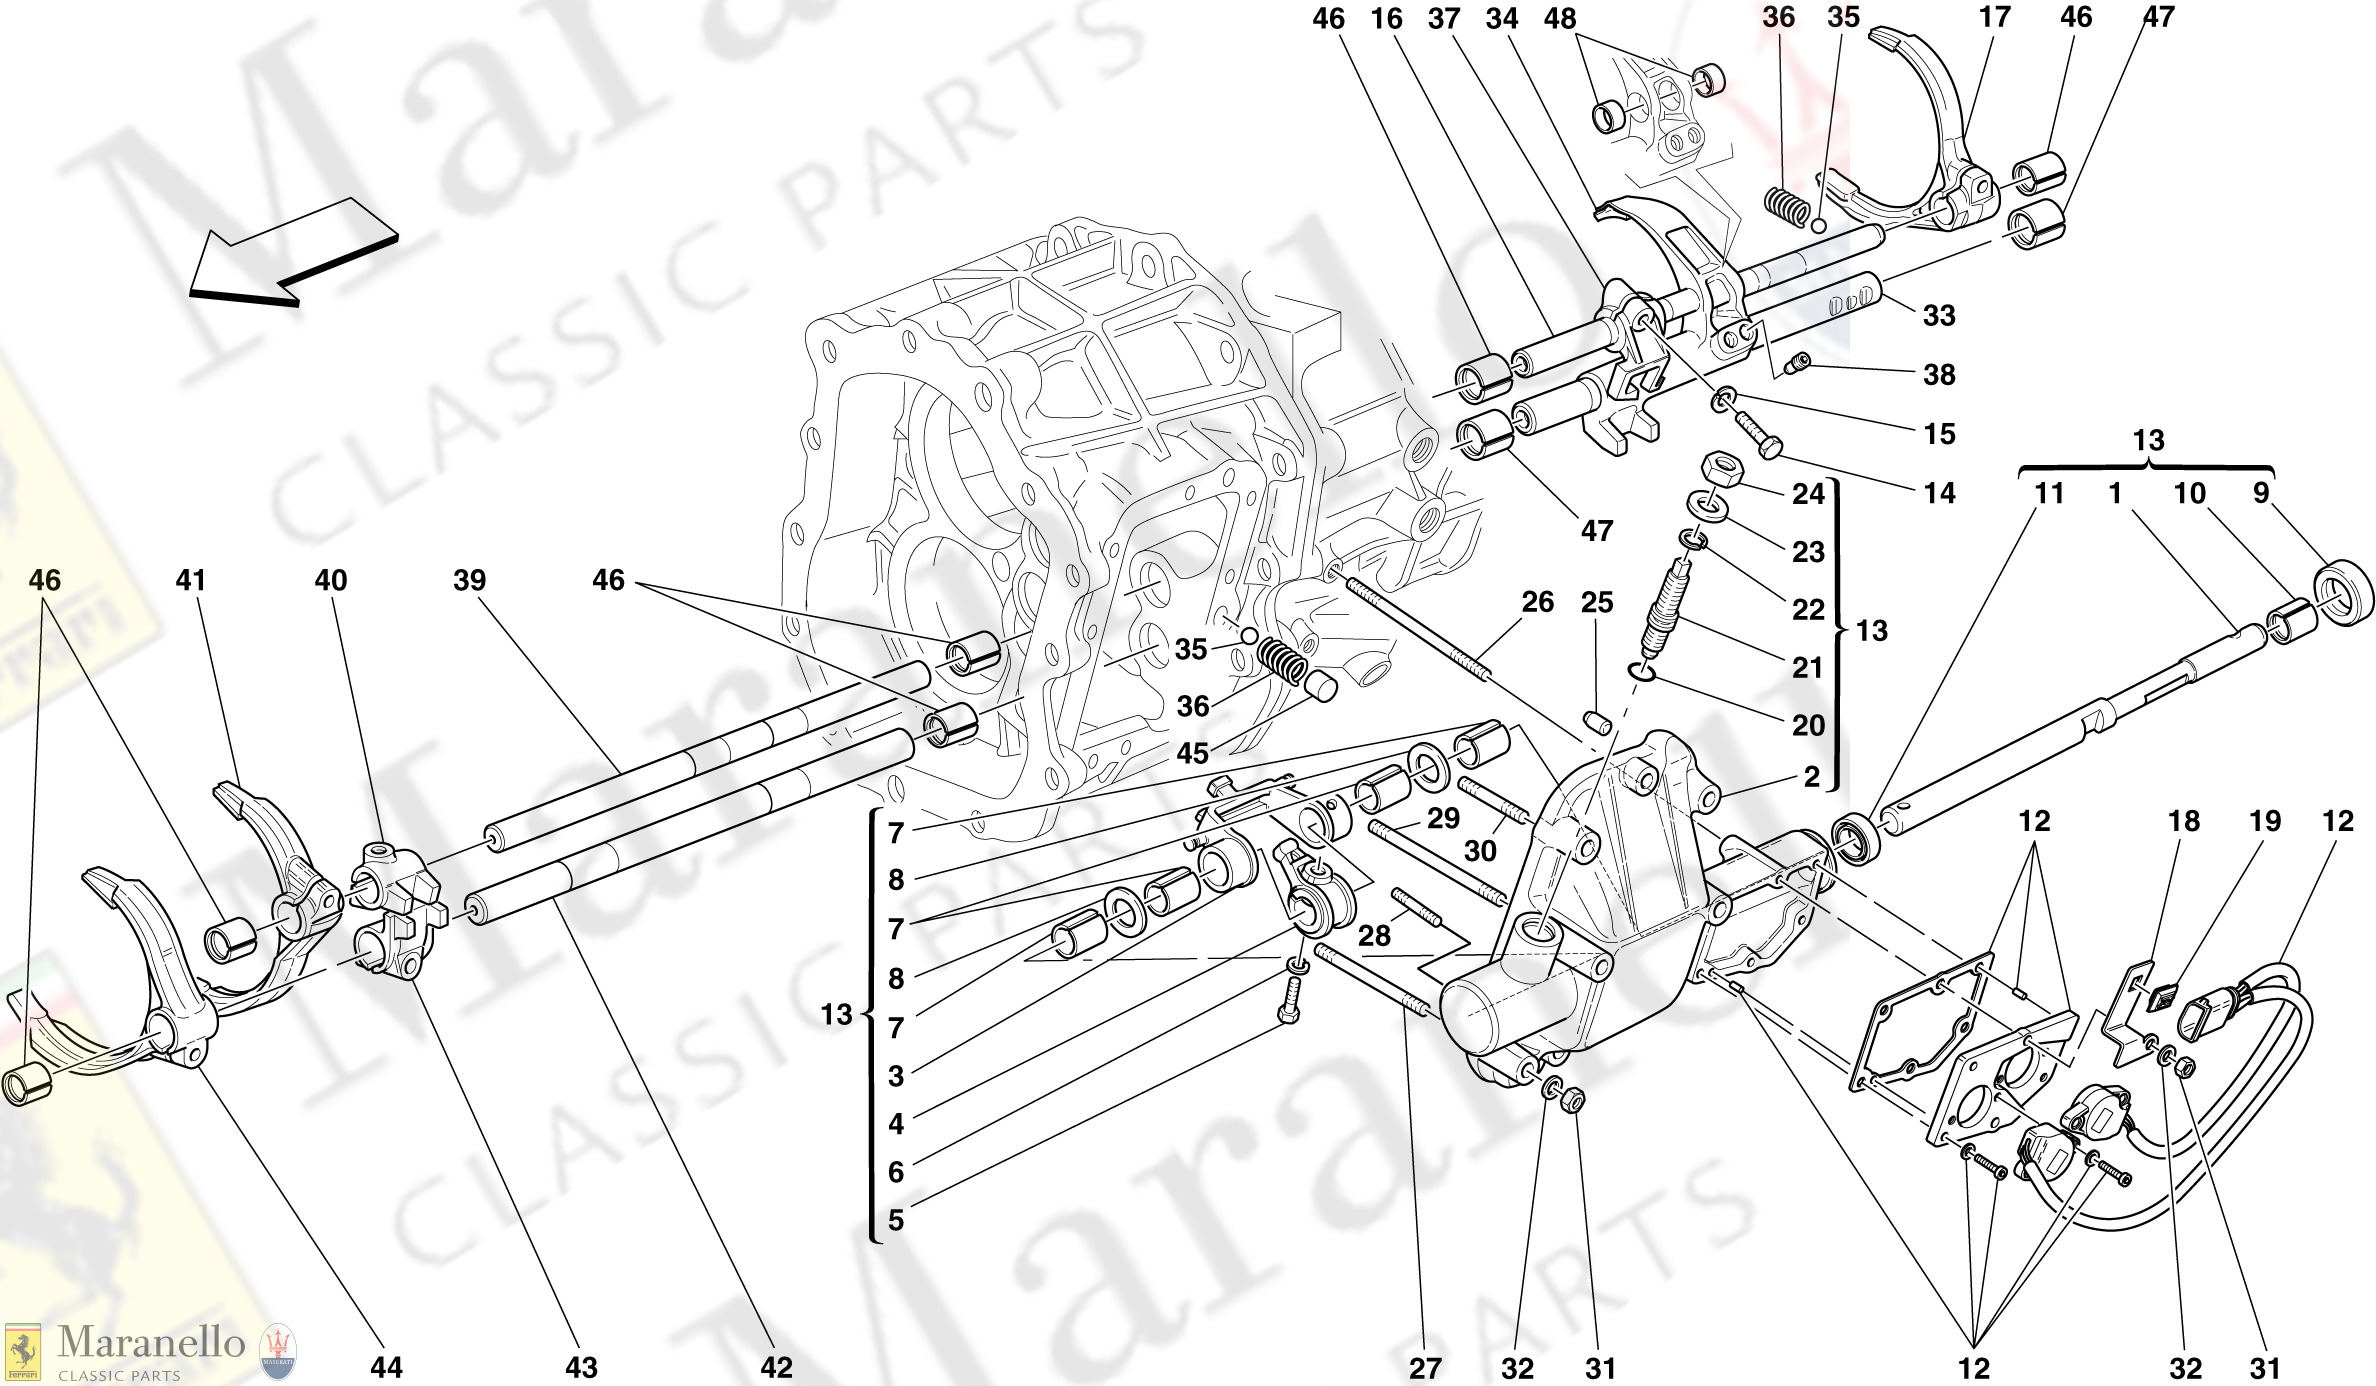 036 - Internal Gearbox Controls -Applicable For F1-